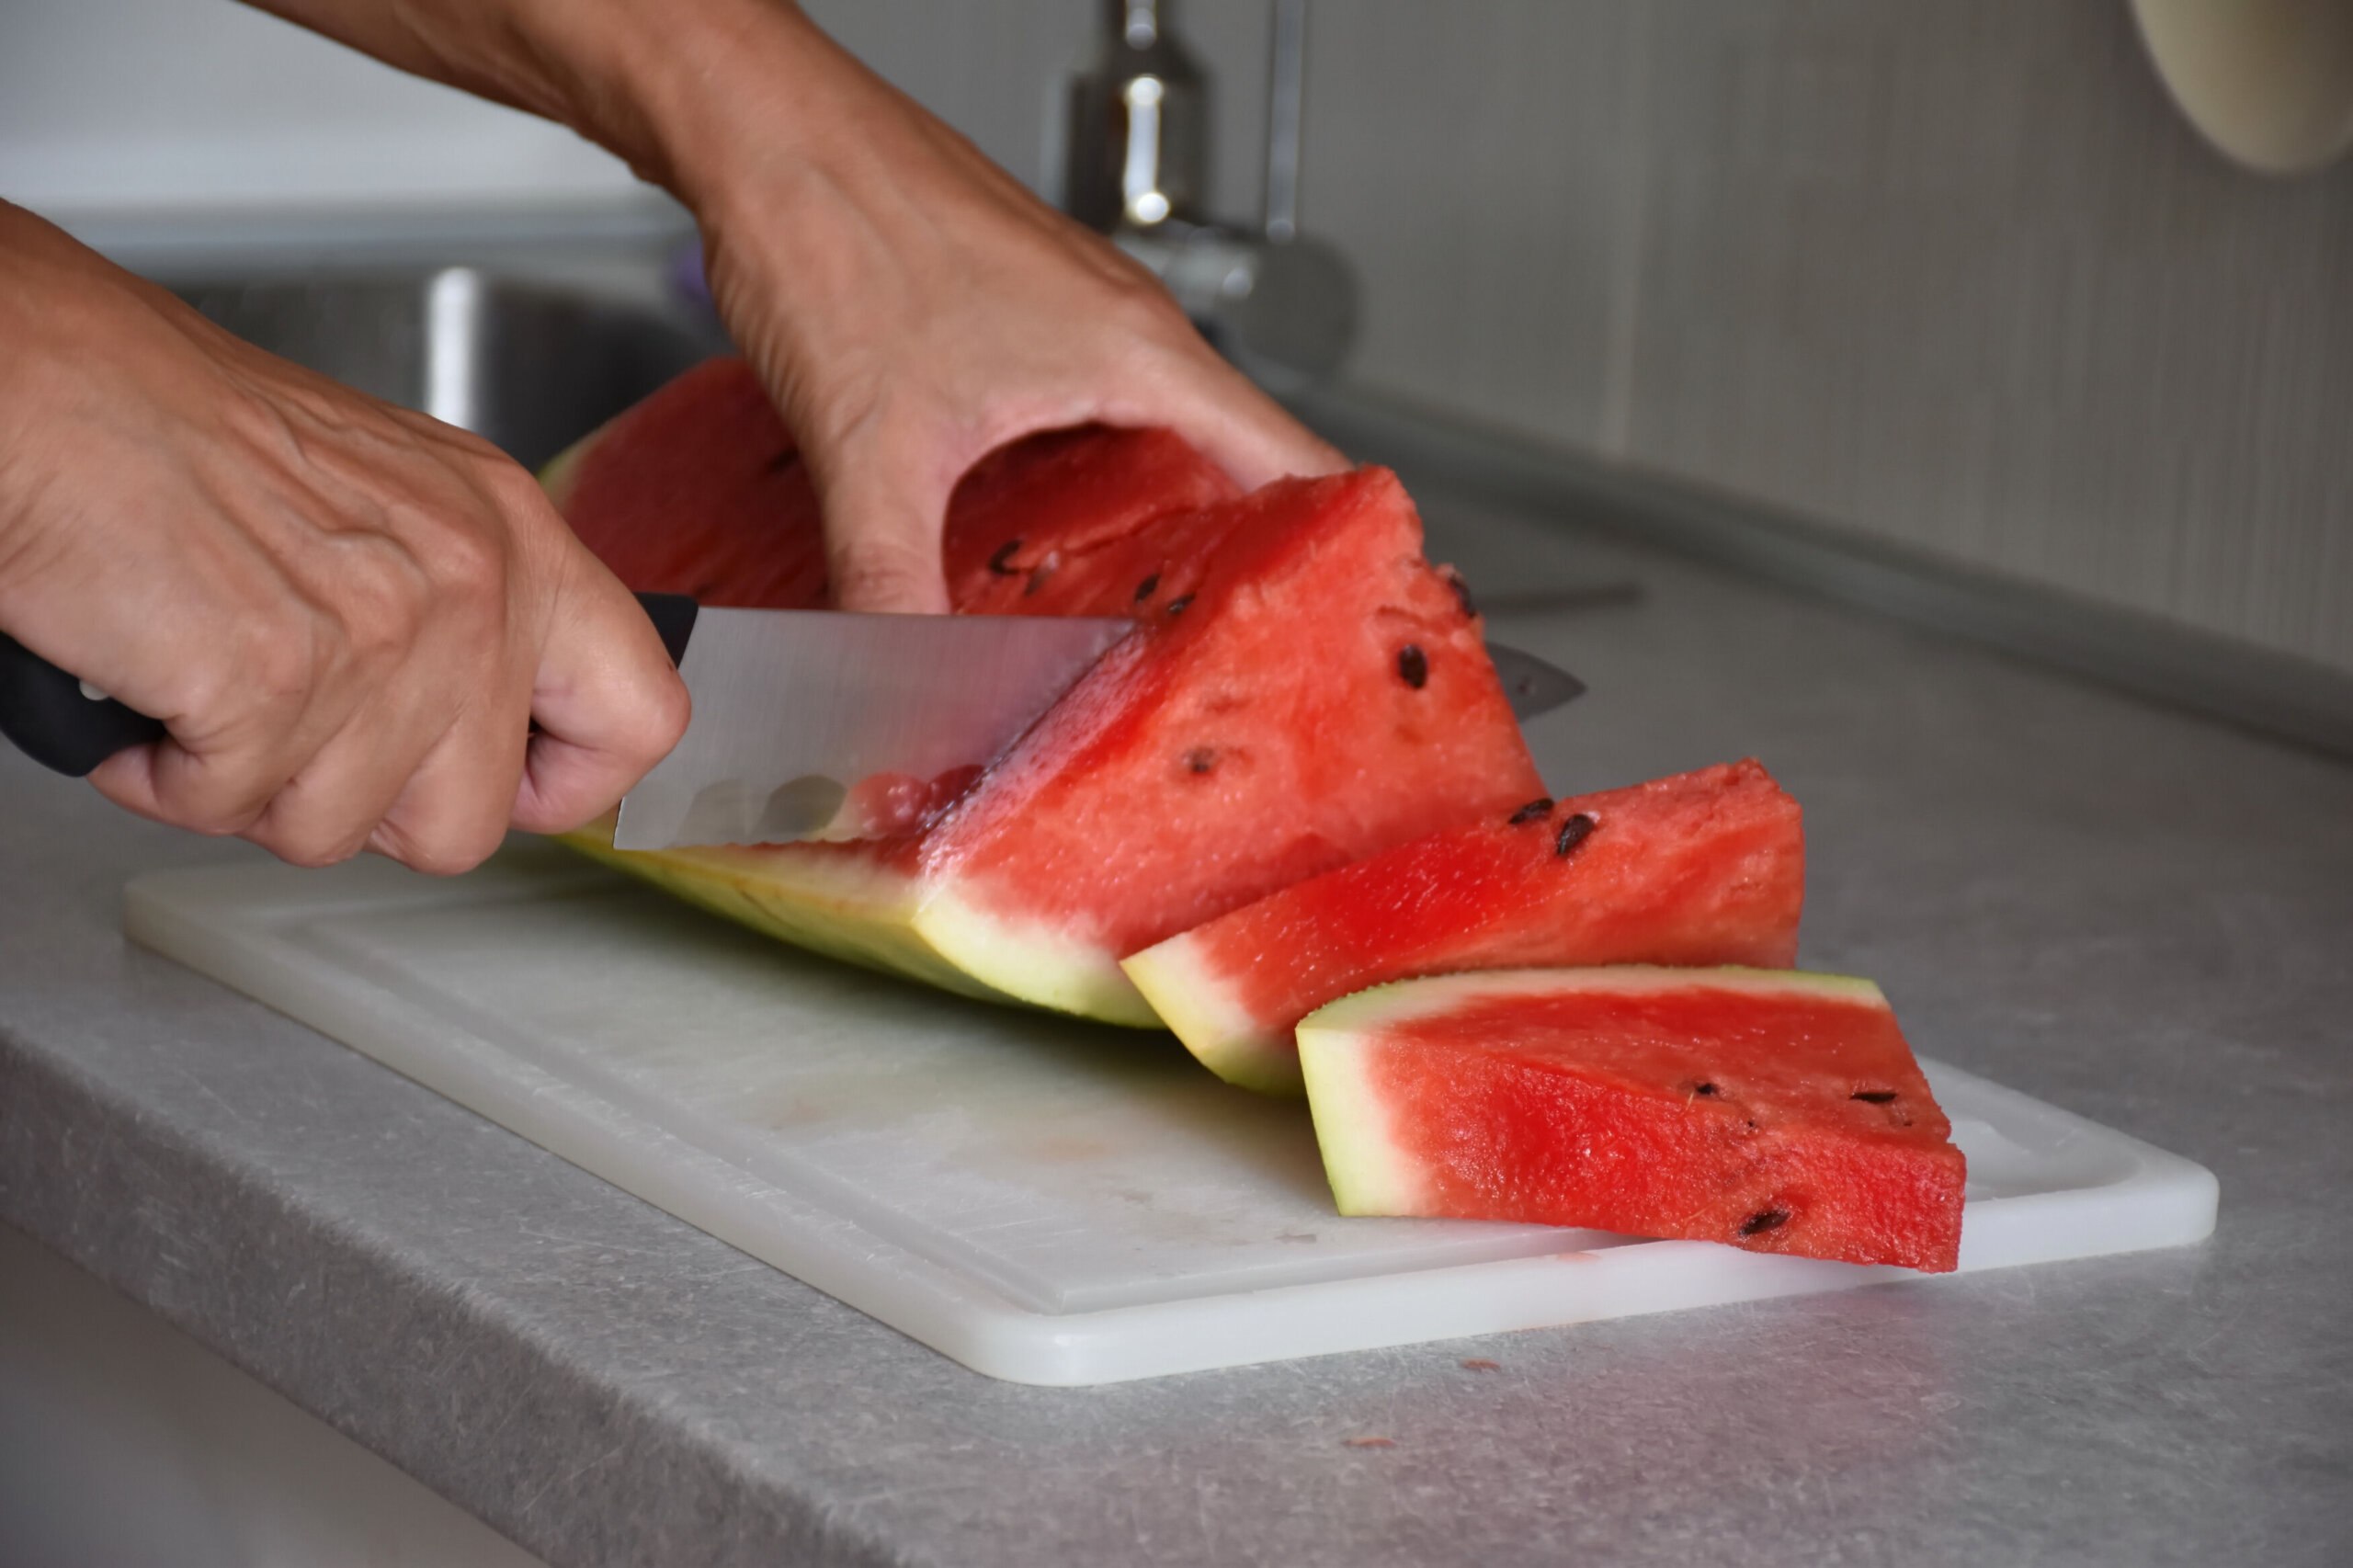 Surprise: Plastic Cutting Boards Shed Microplastics During Use - Core77